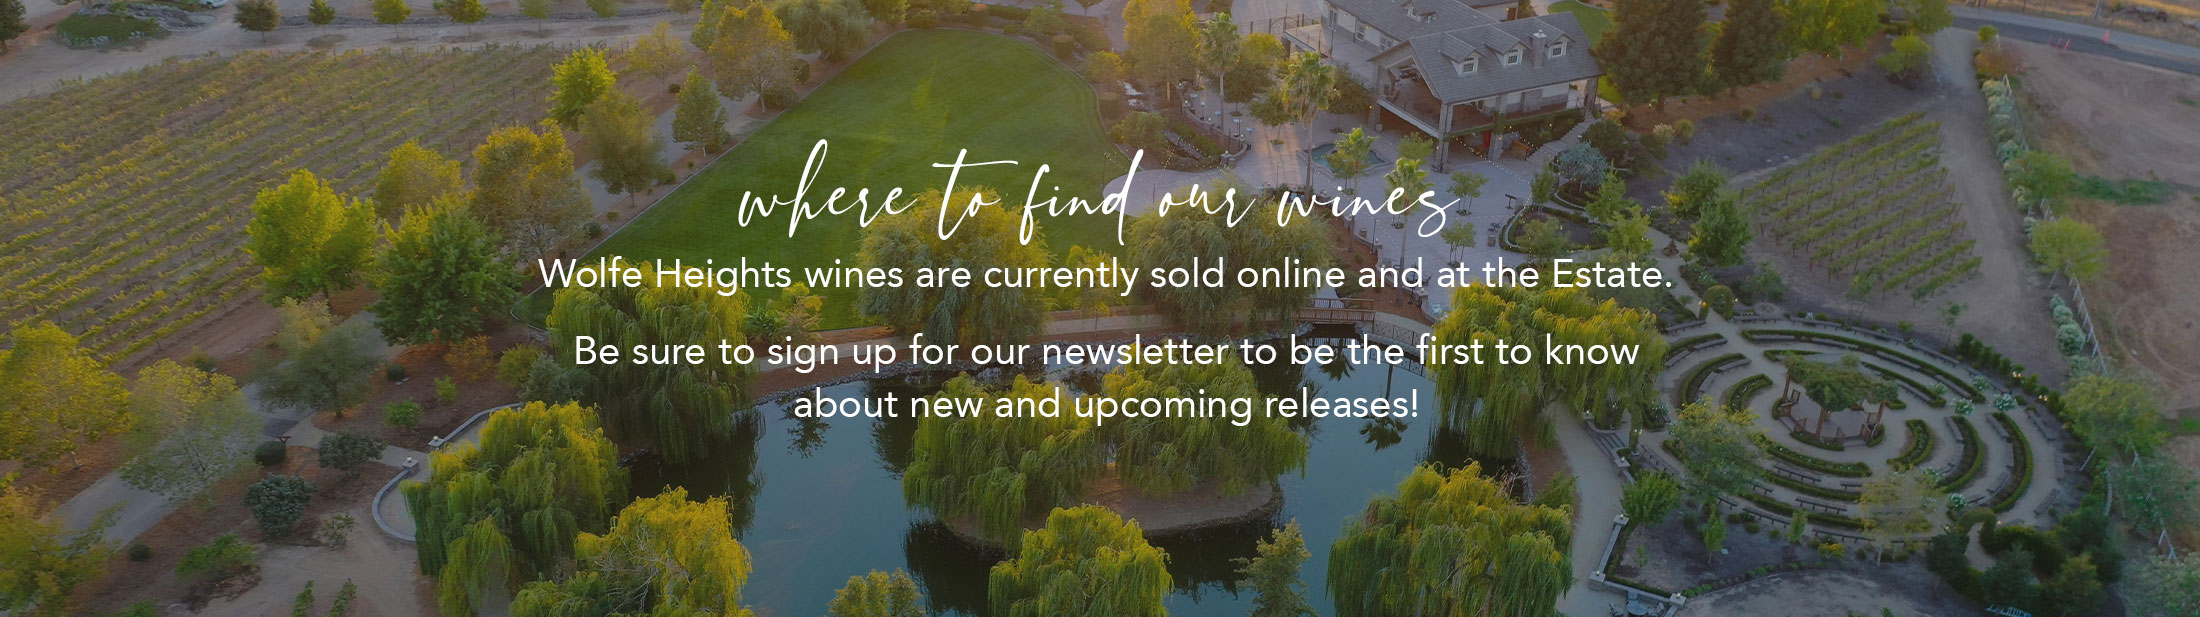 Where to find our Wolfe Heights Estates wines